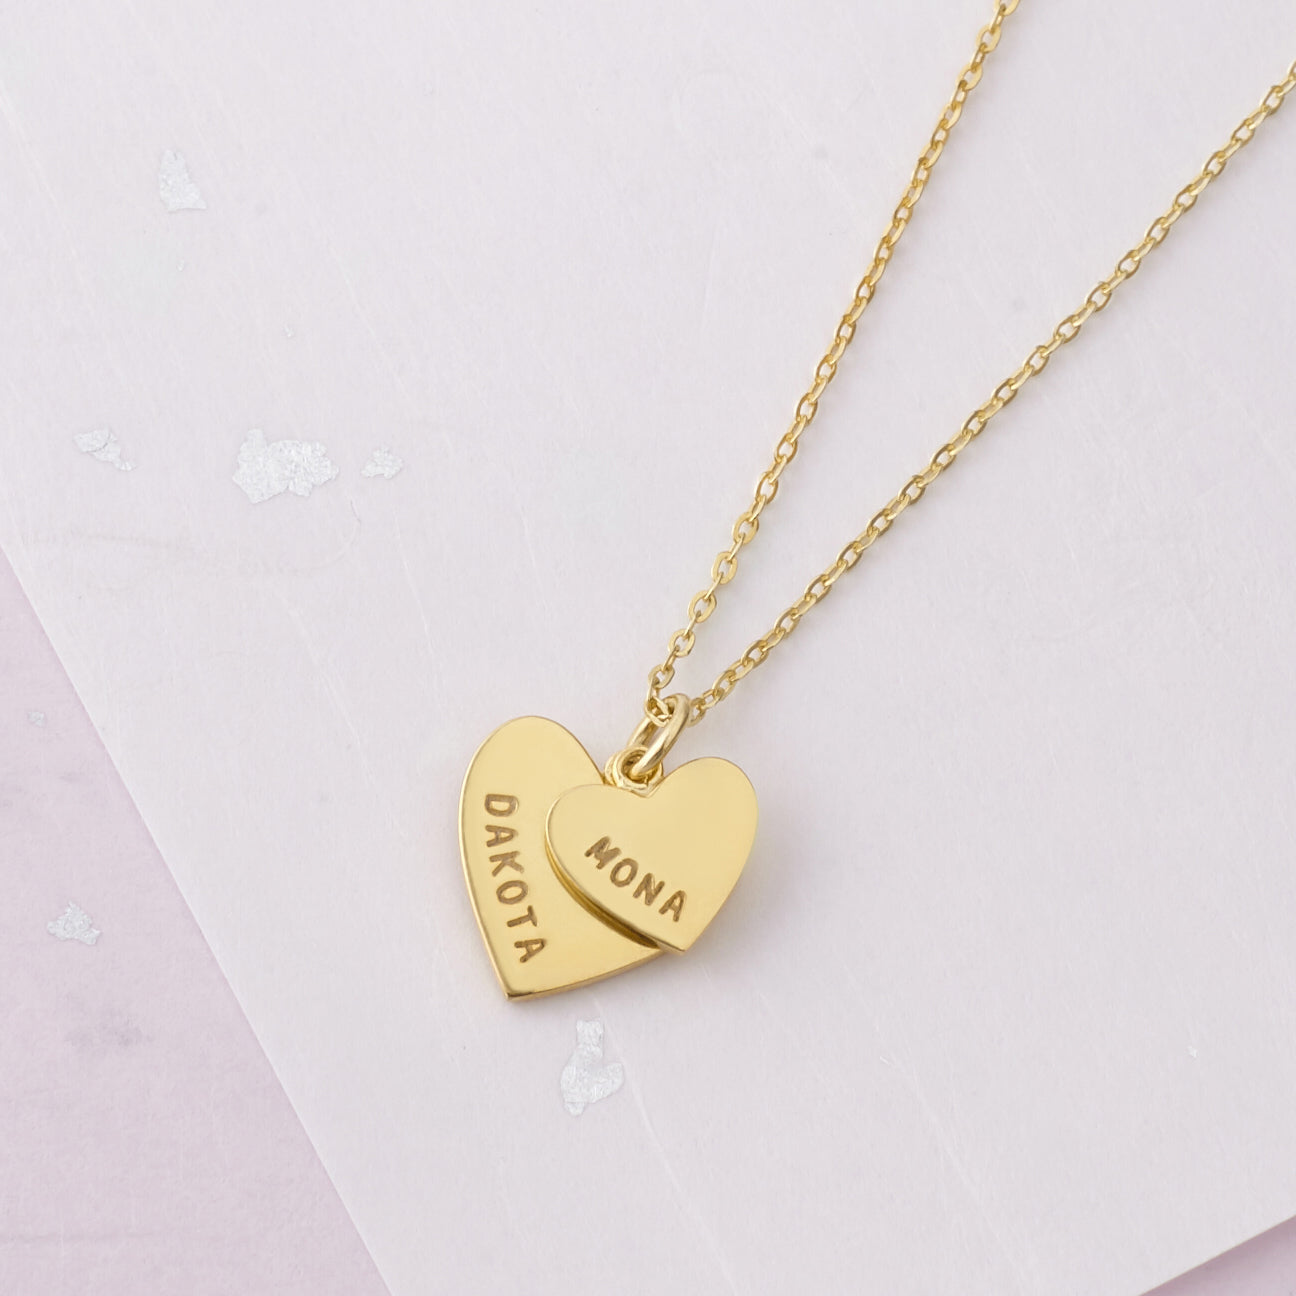 Custom Personalized Necklace for Moms